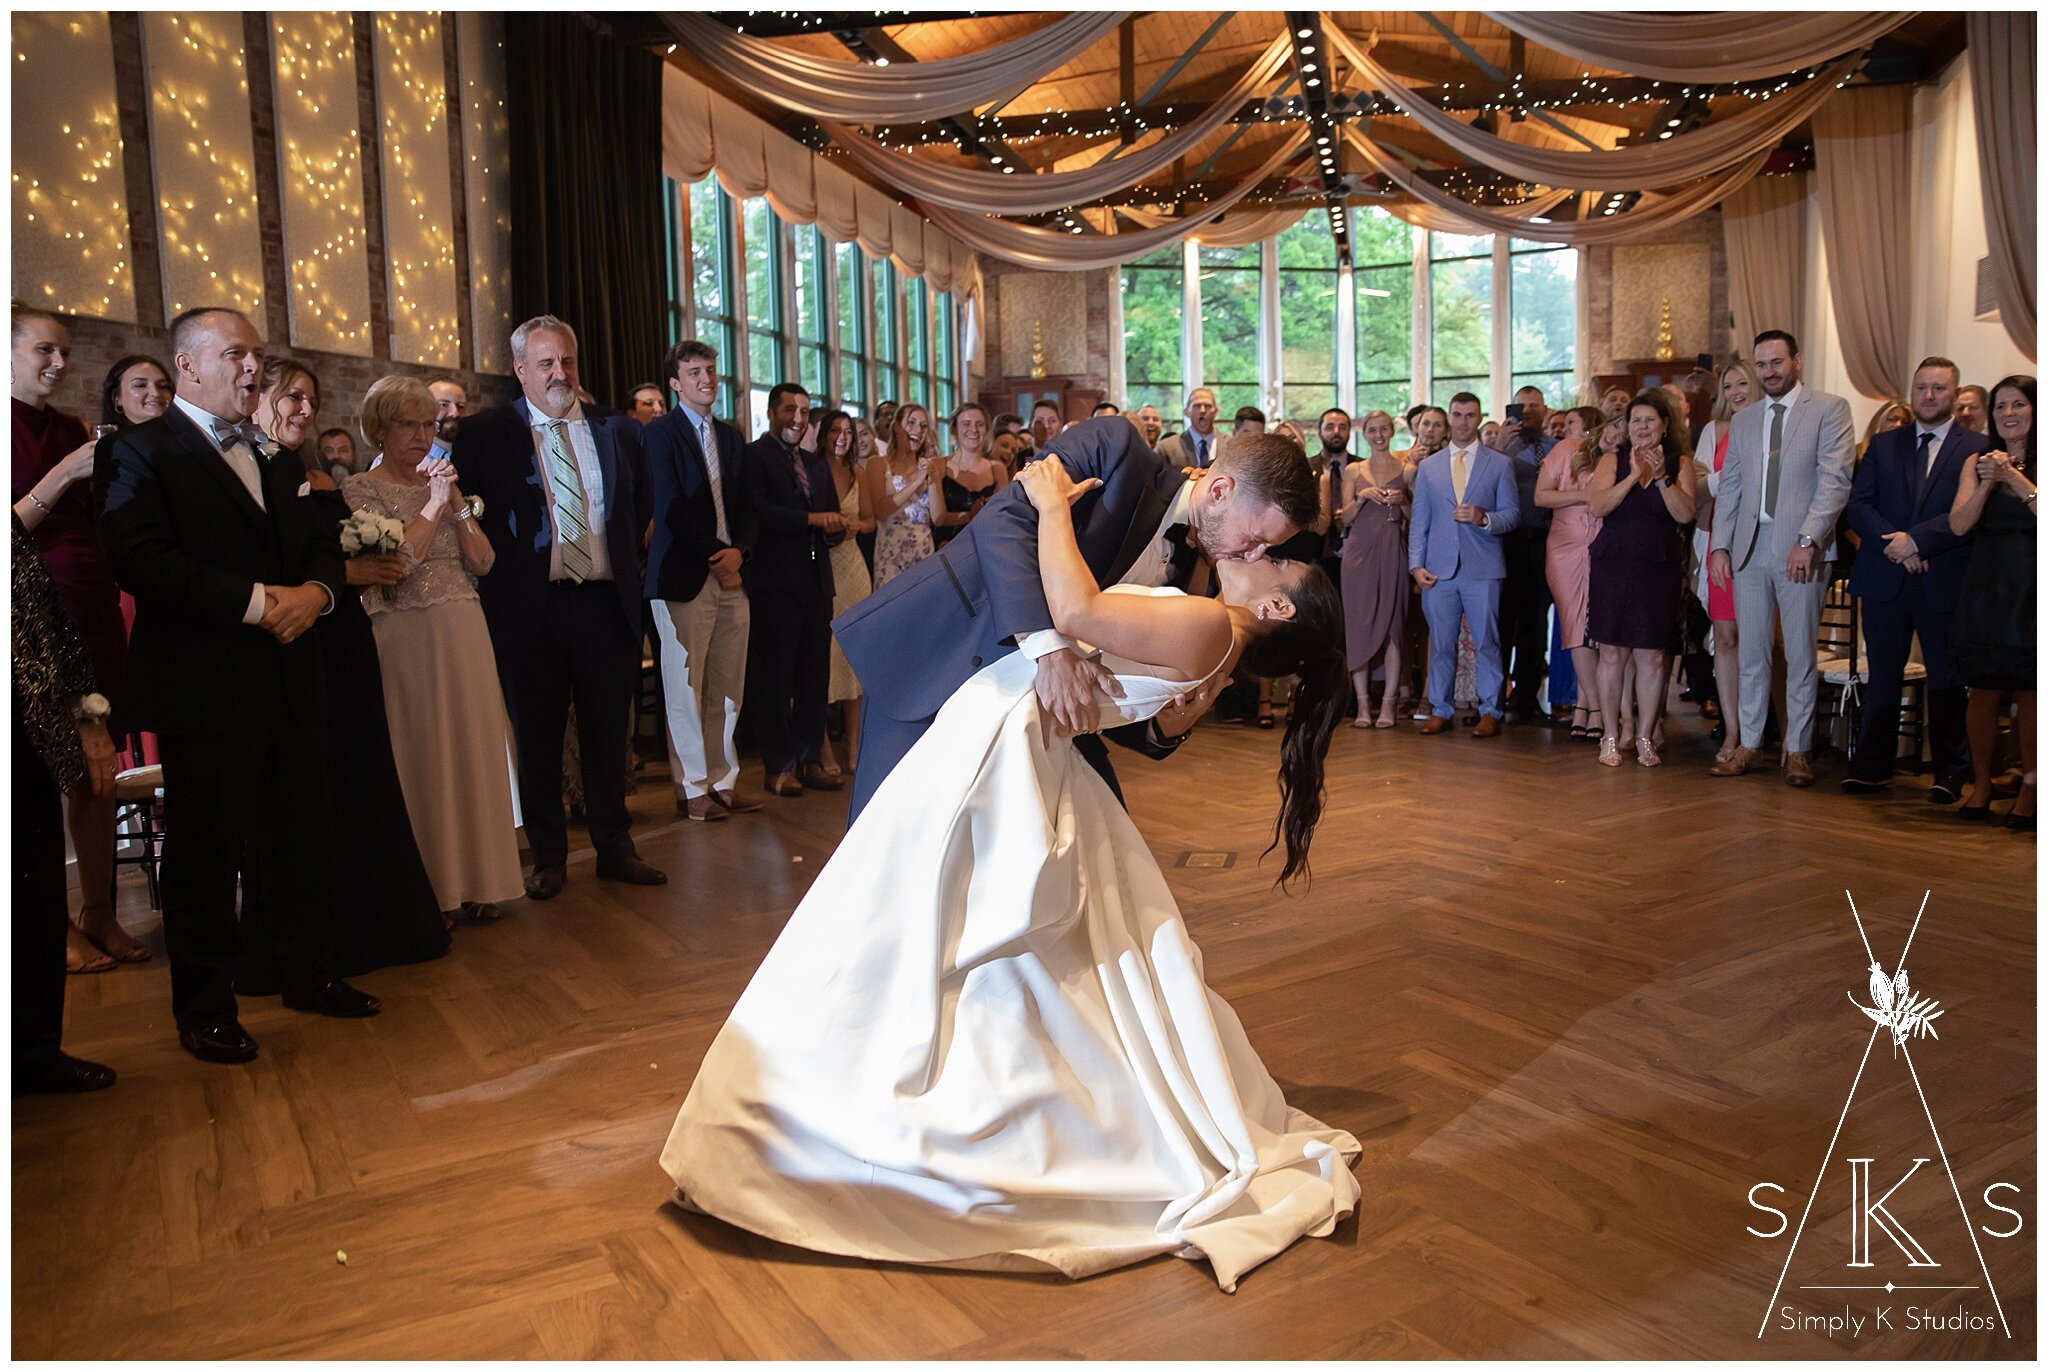 First dance couple and guests at their Pond House Cafe wedding in West Hartford, CT.